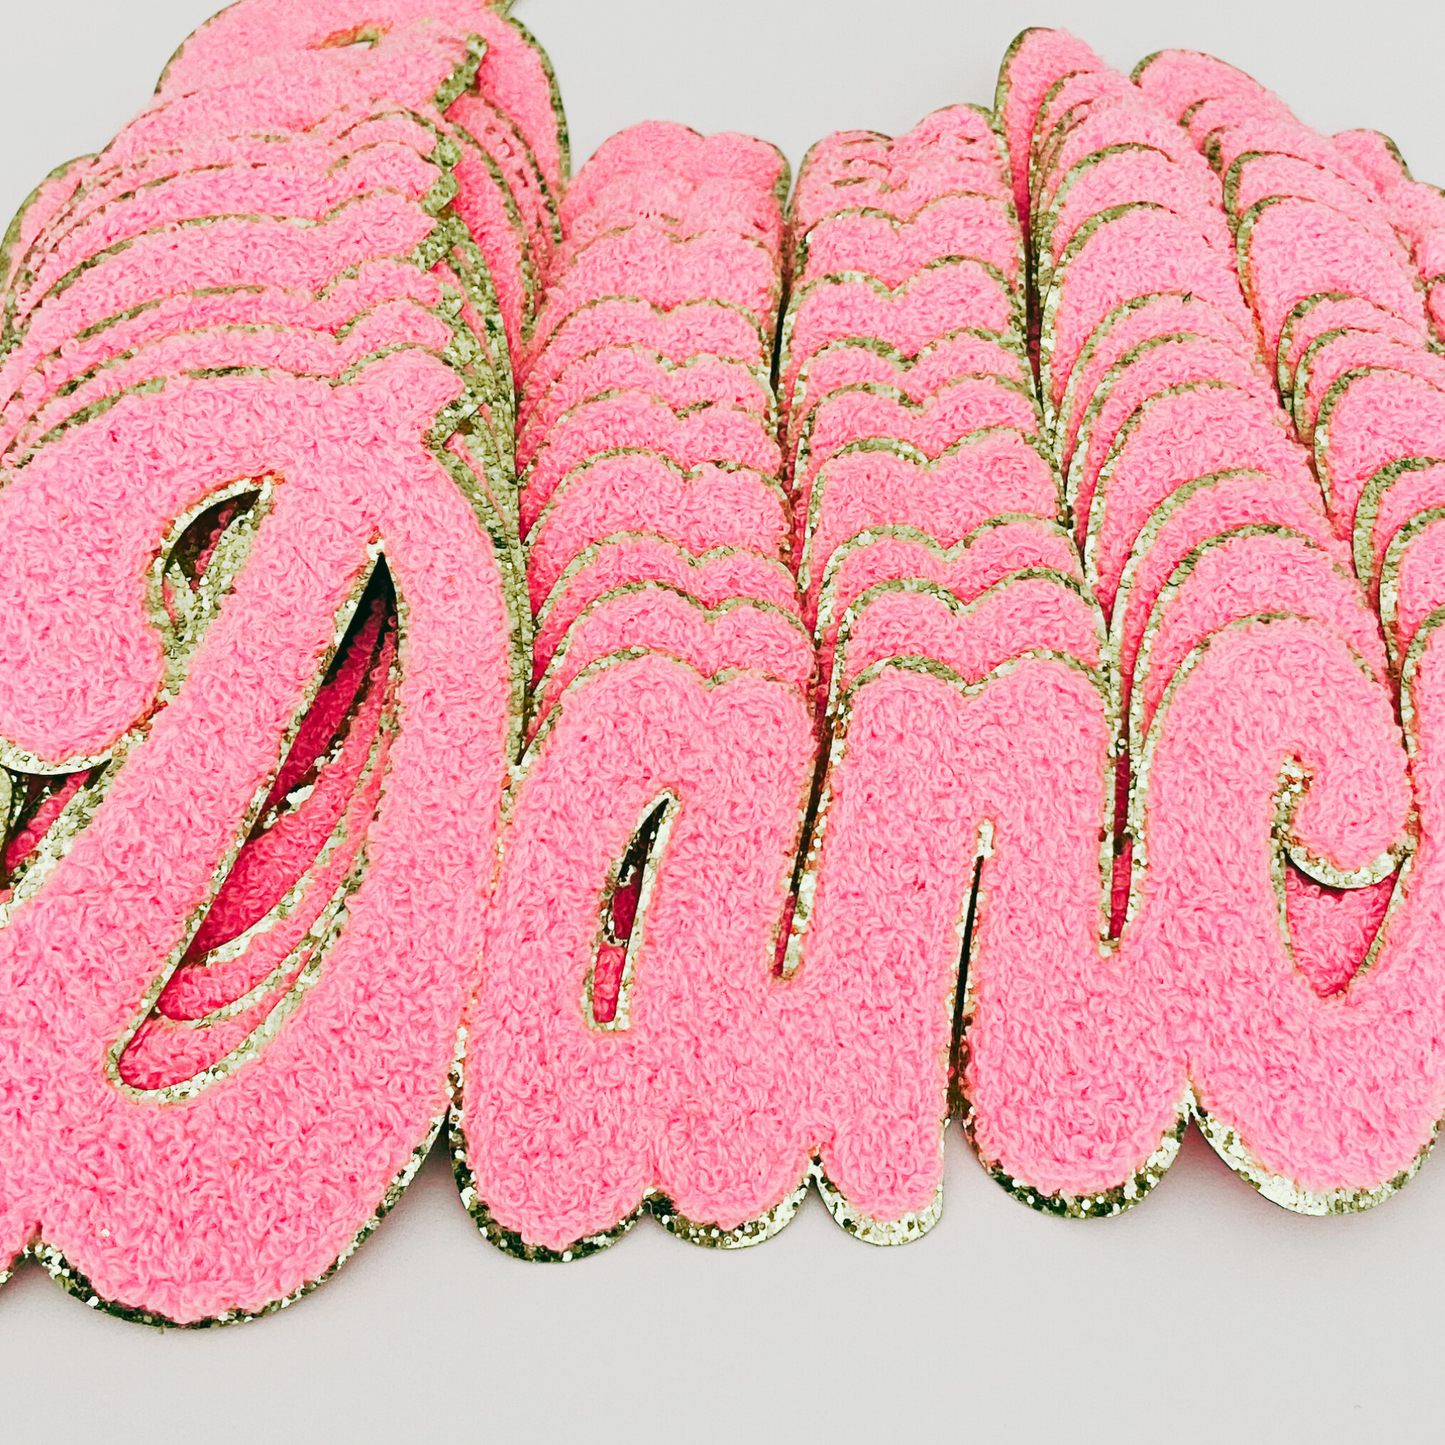 Chenille Dance in Pink 11" x 6" - Chenille Patch